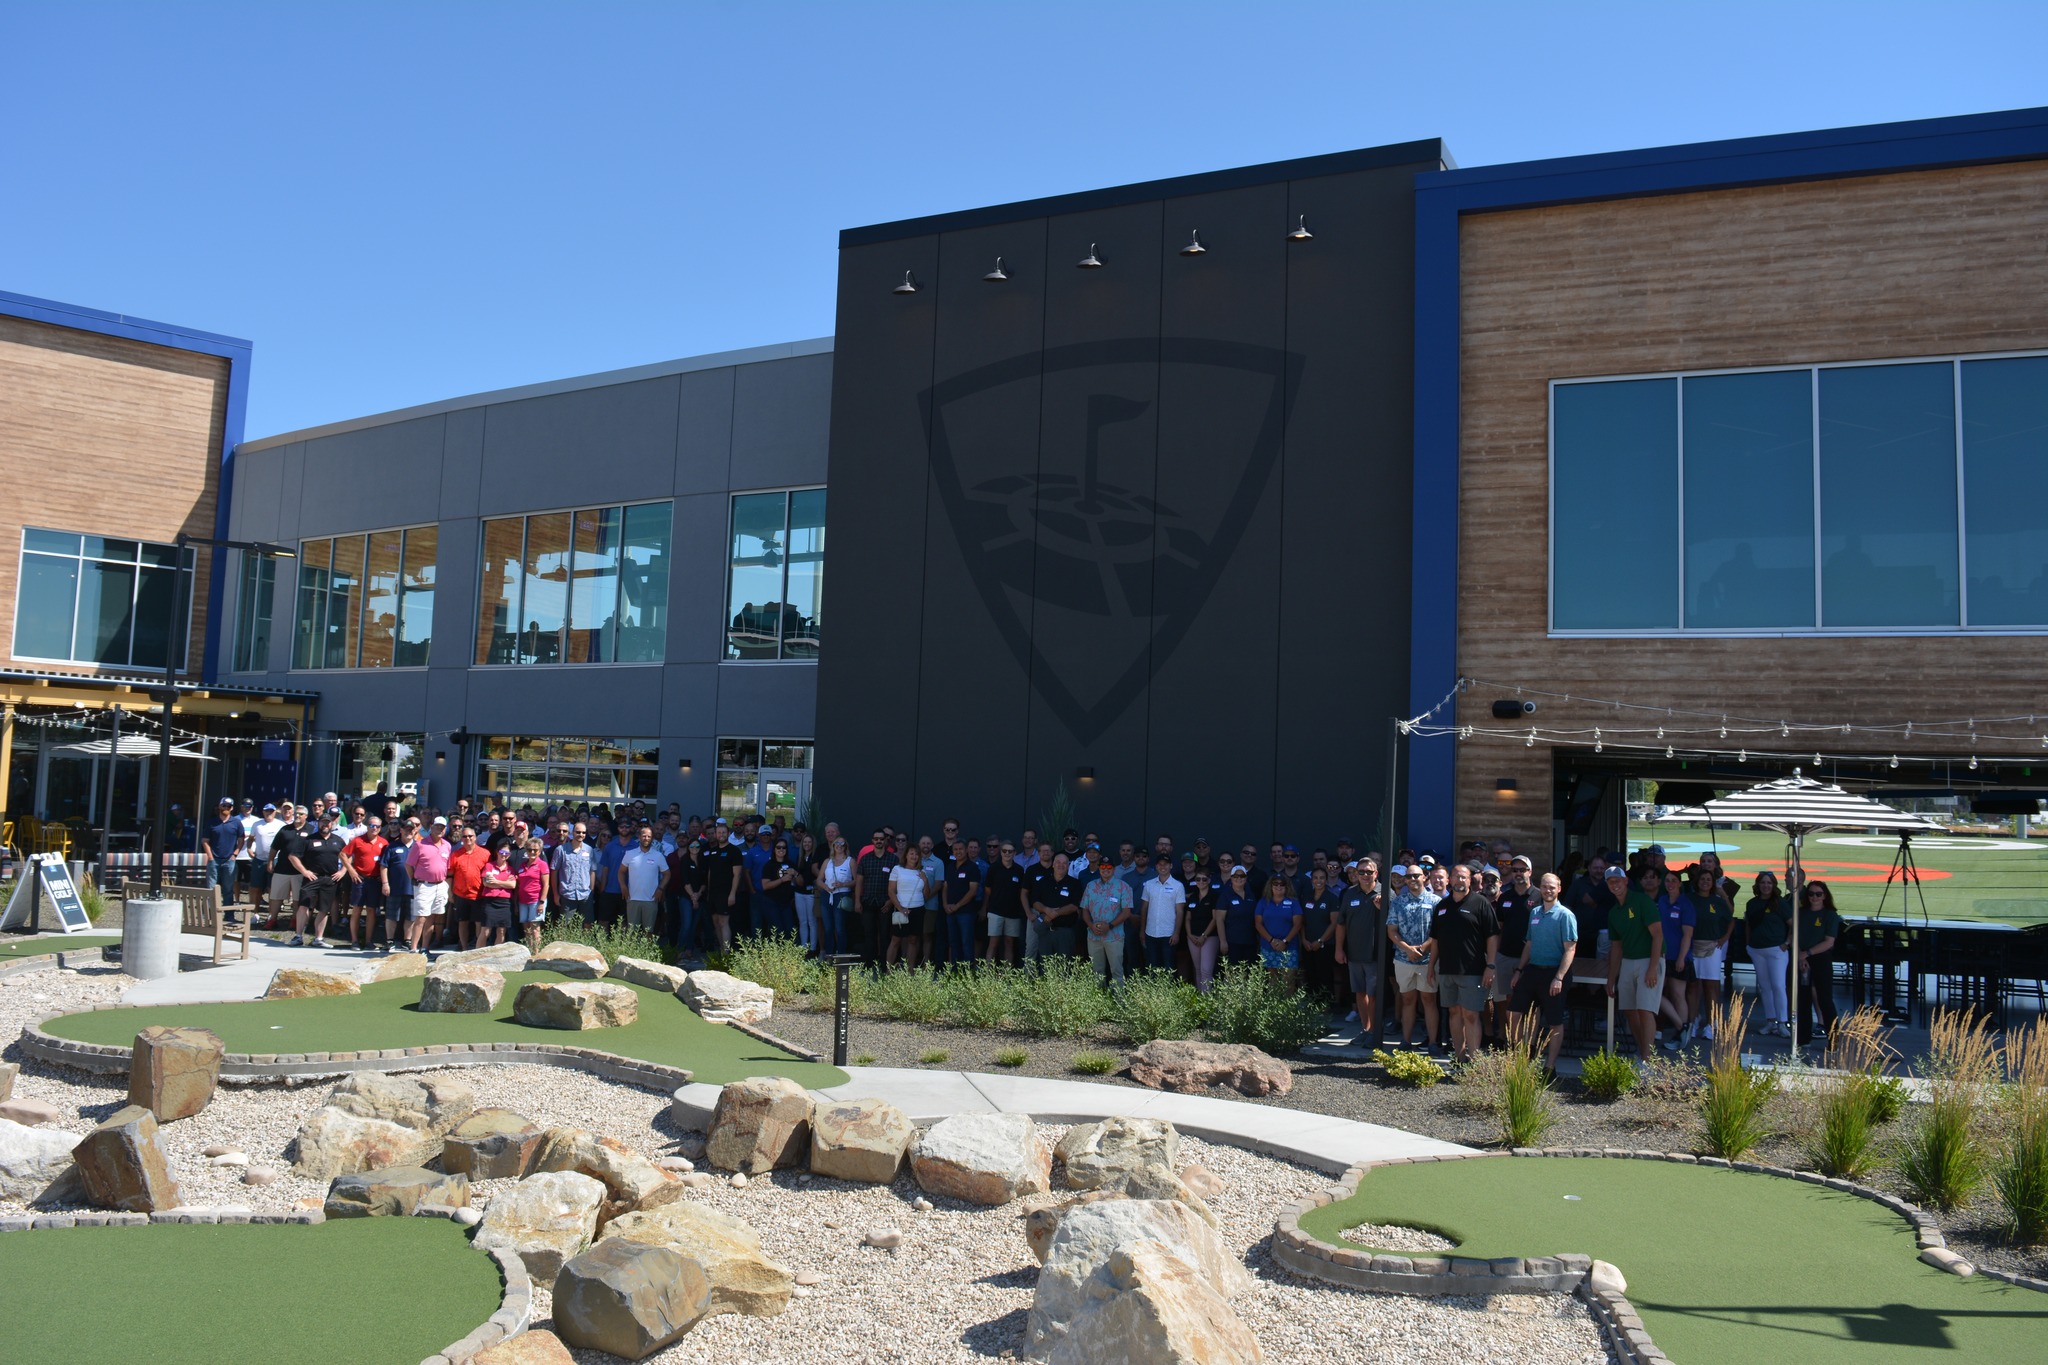 group photo at topgolf event